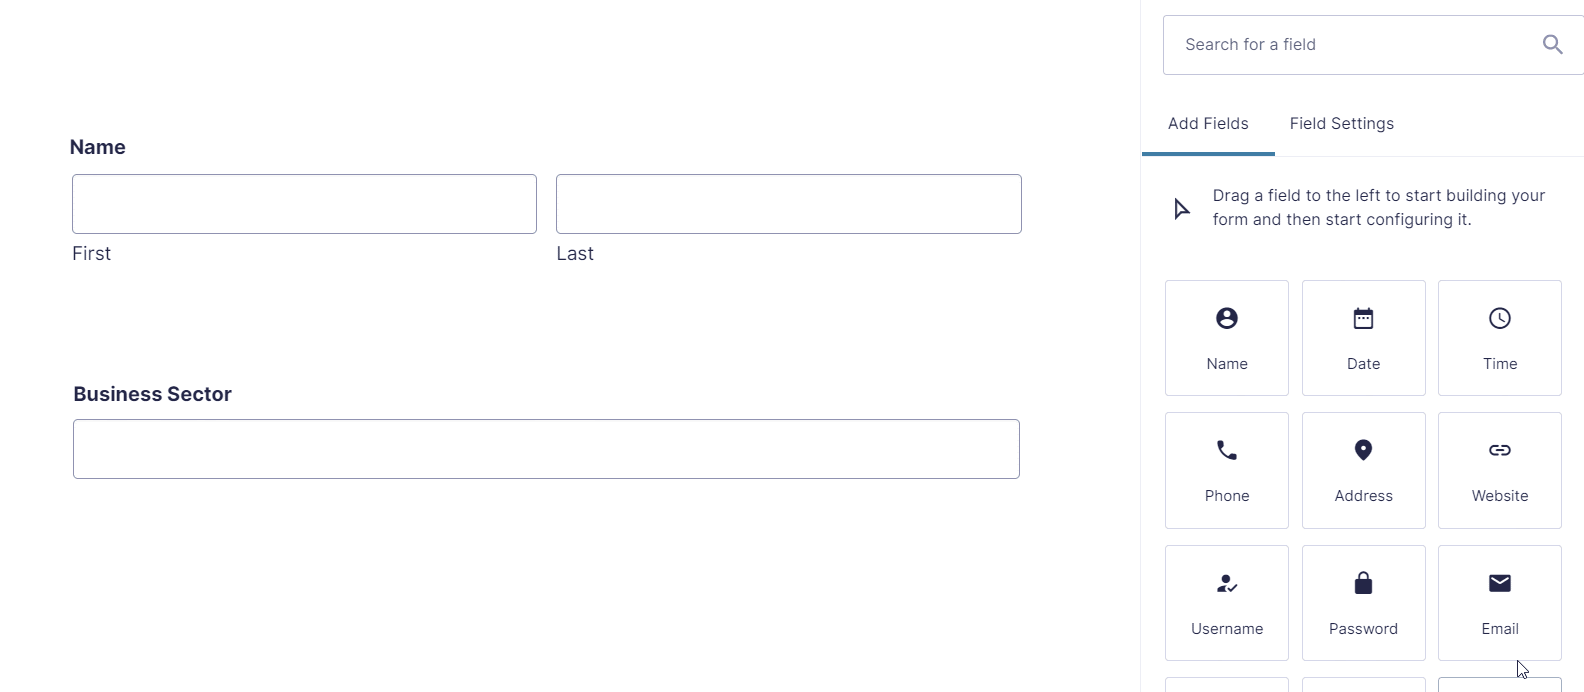 Editing a form by dragging and dropping fields